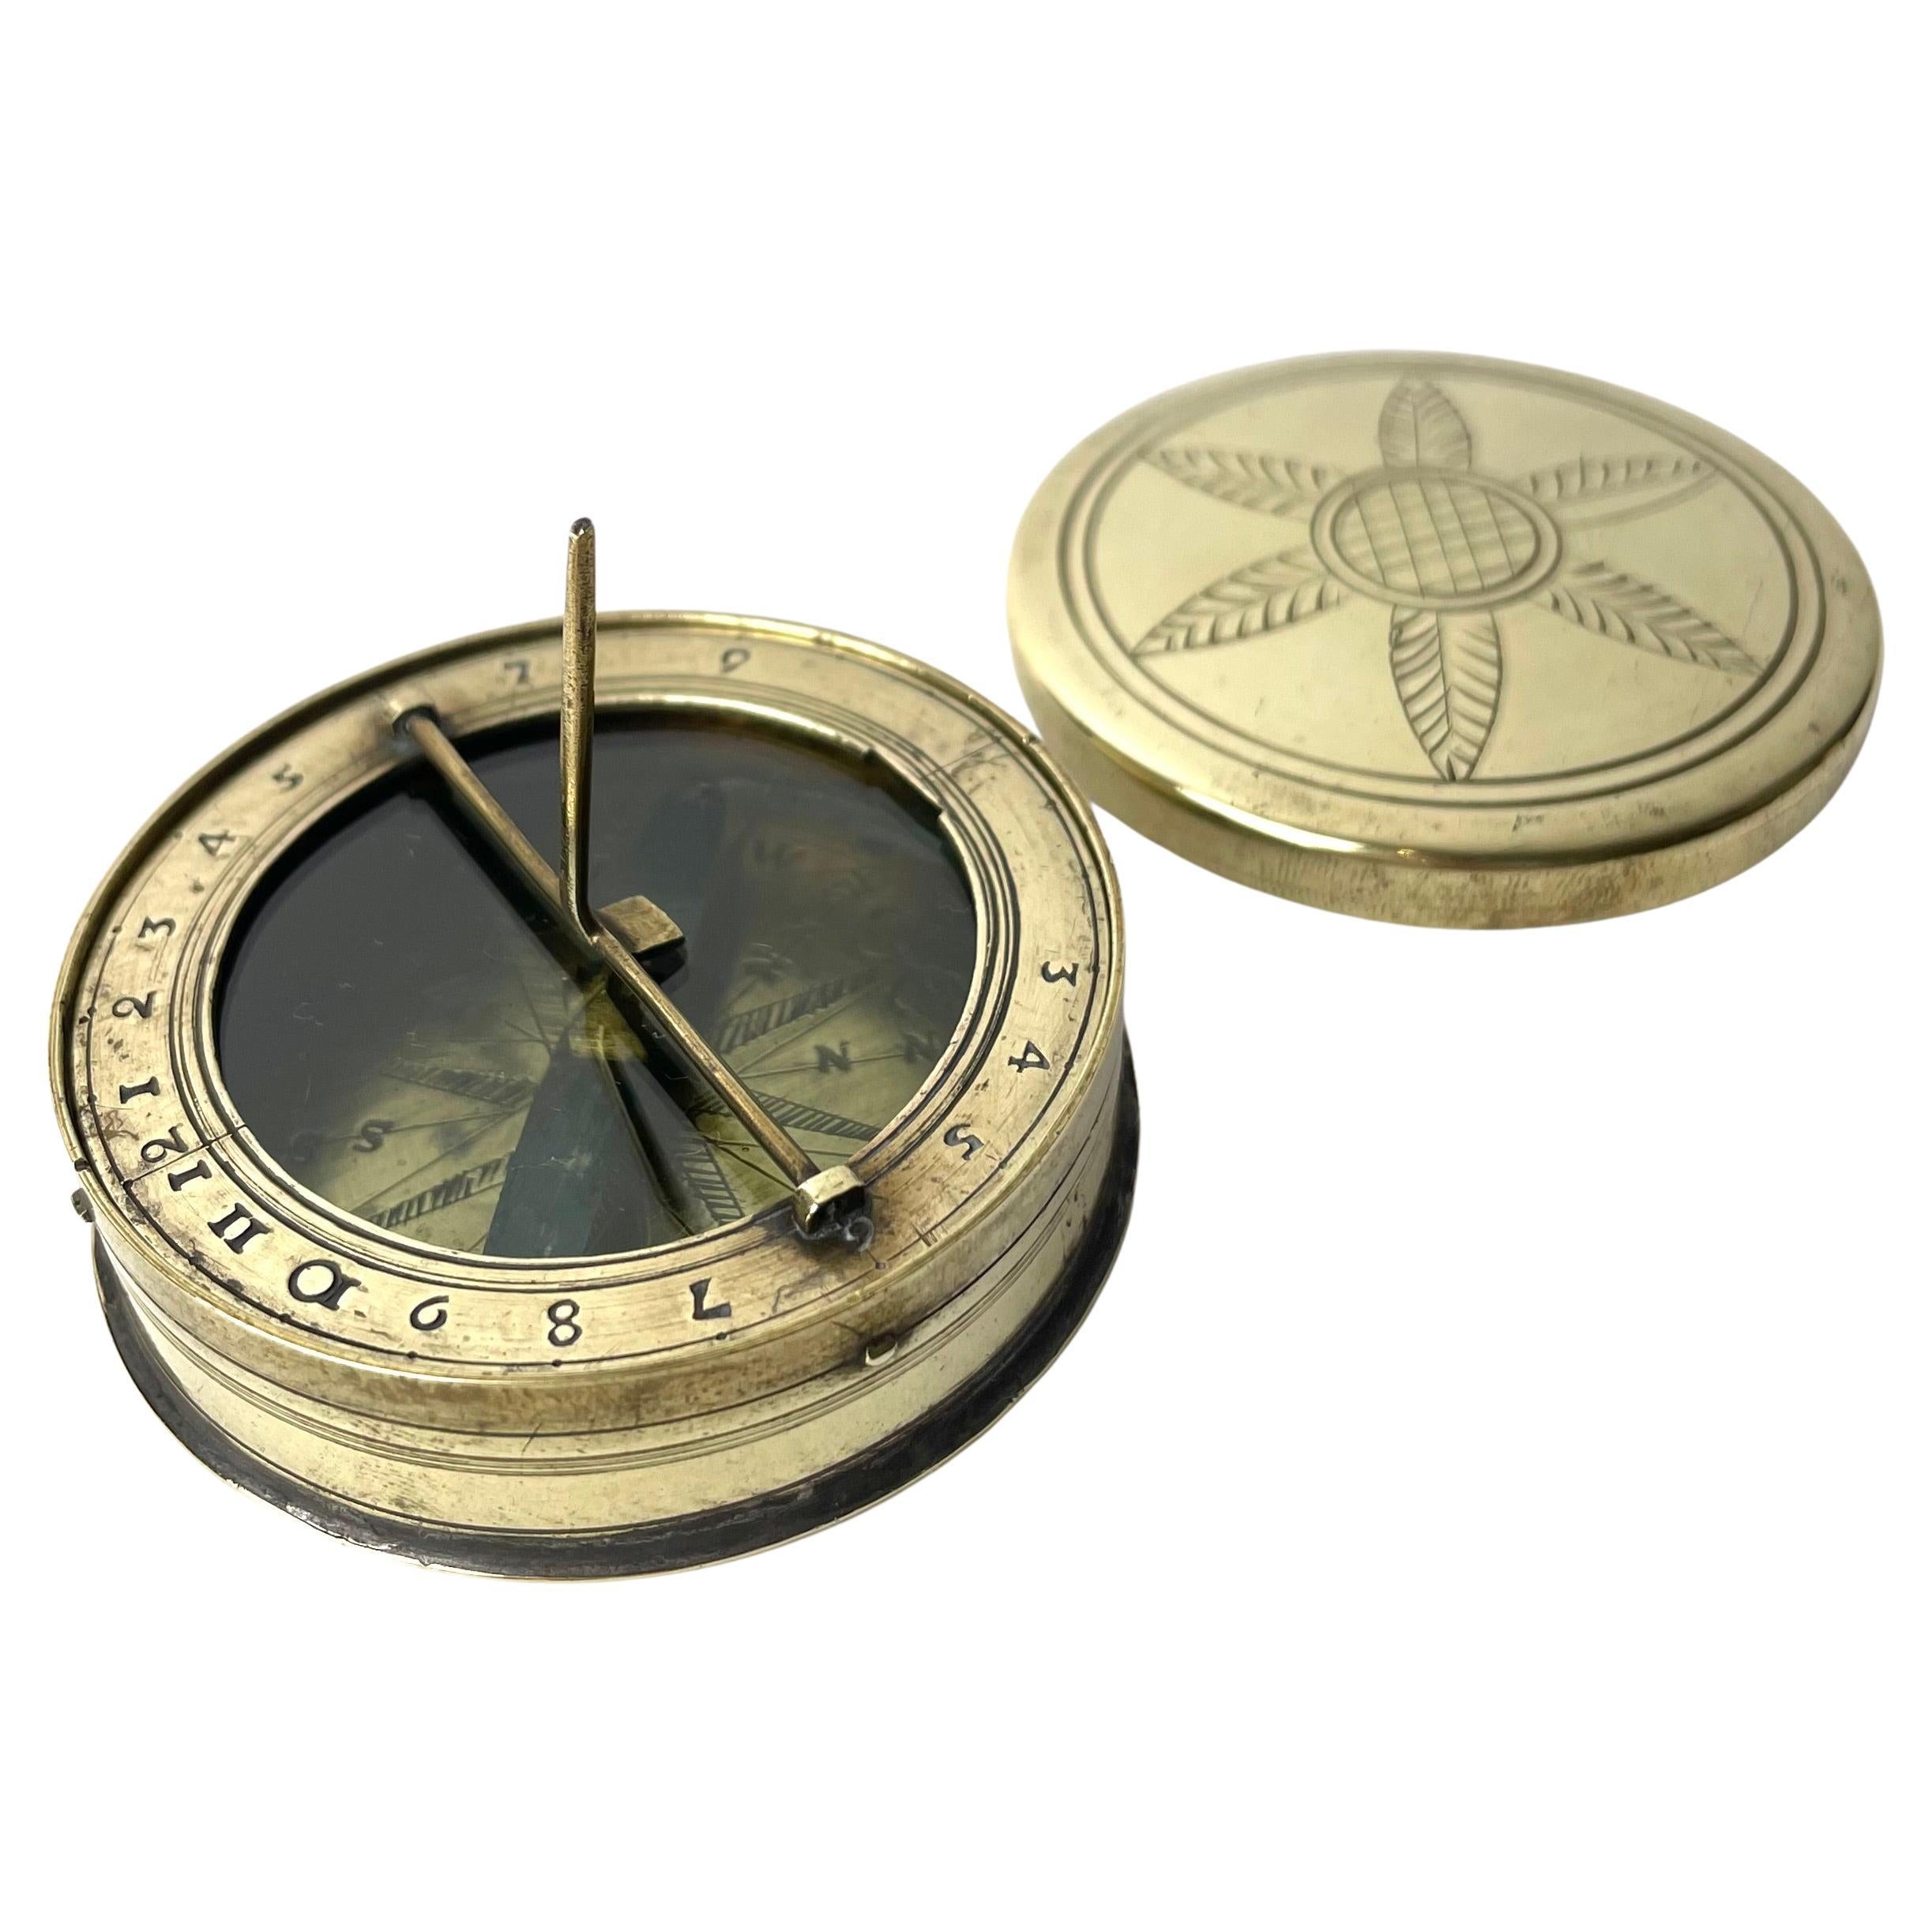 Gustavian Compass with Sundial in Brass, Late 18th/Early 19th Century Sweden